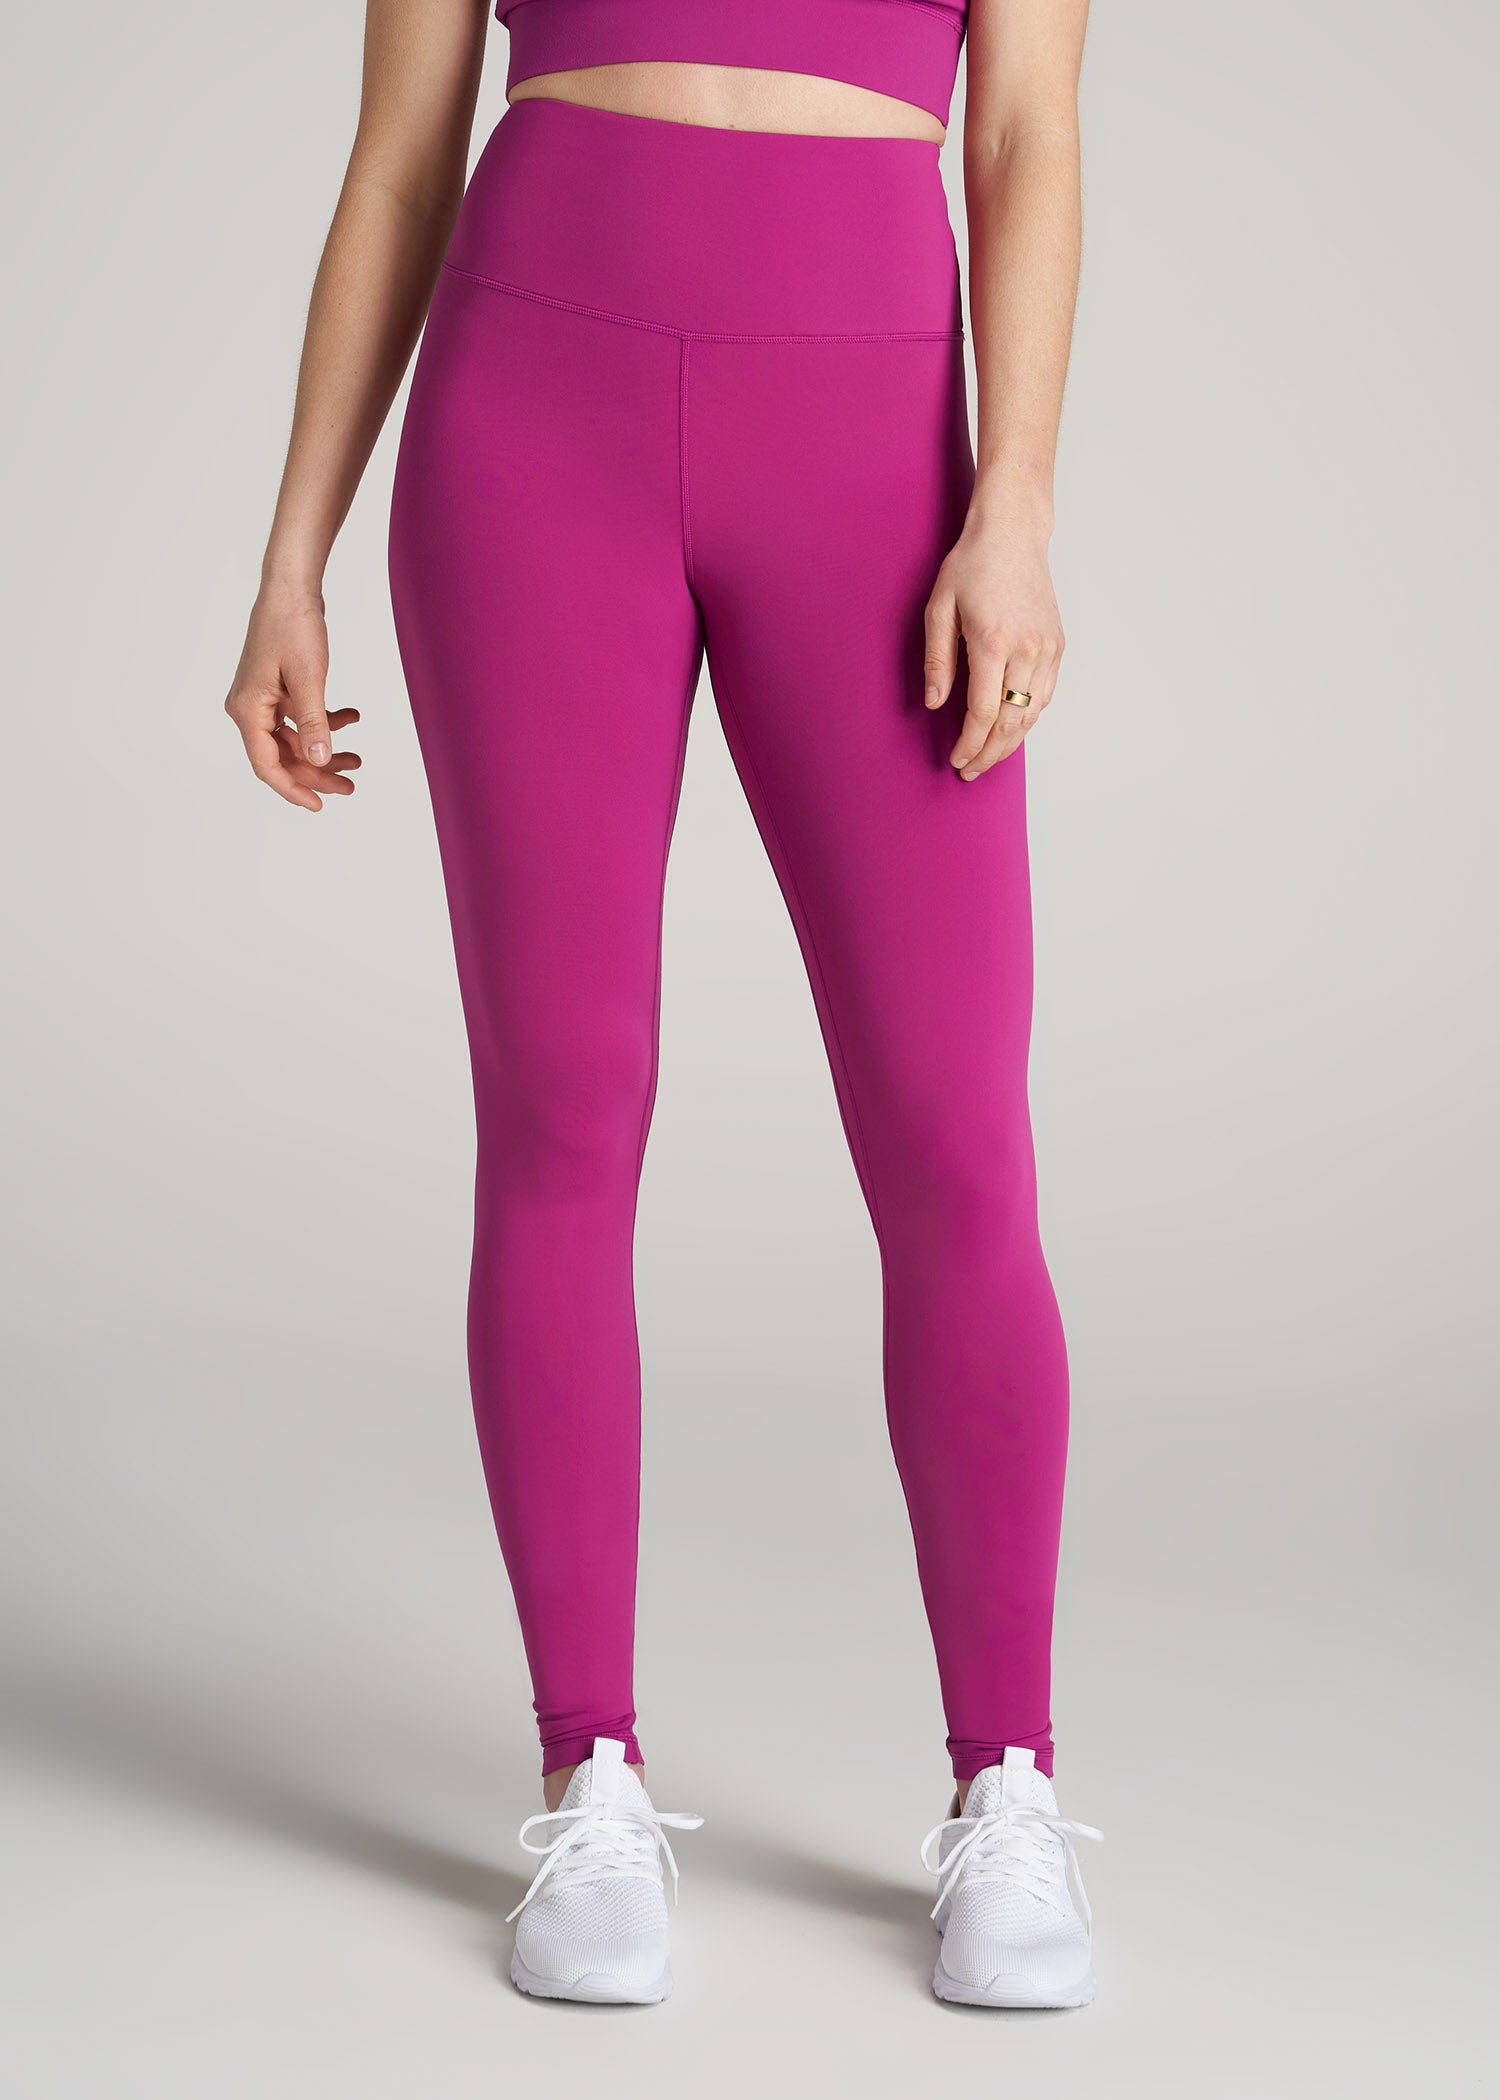 AT Balance High-Rise Leggings for Tall Women in Pink Orchid